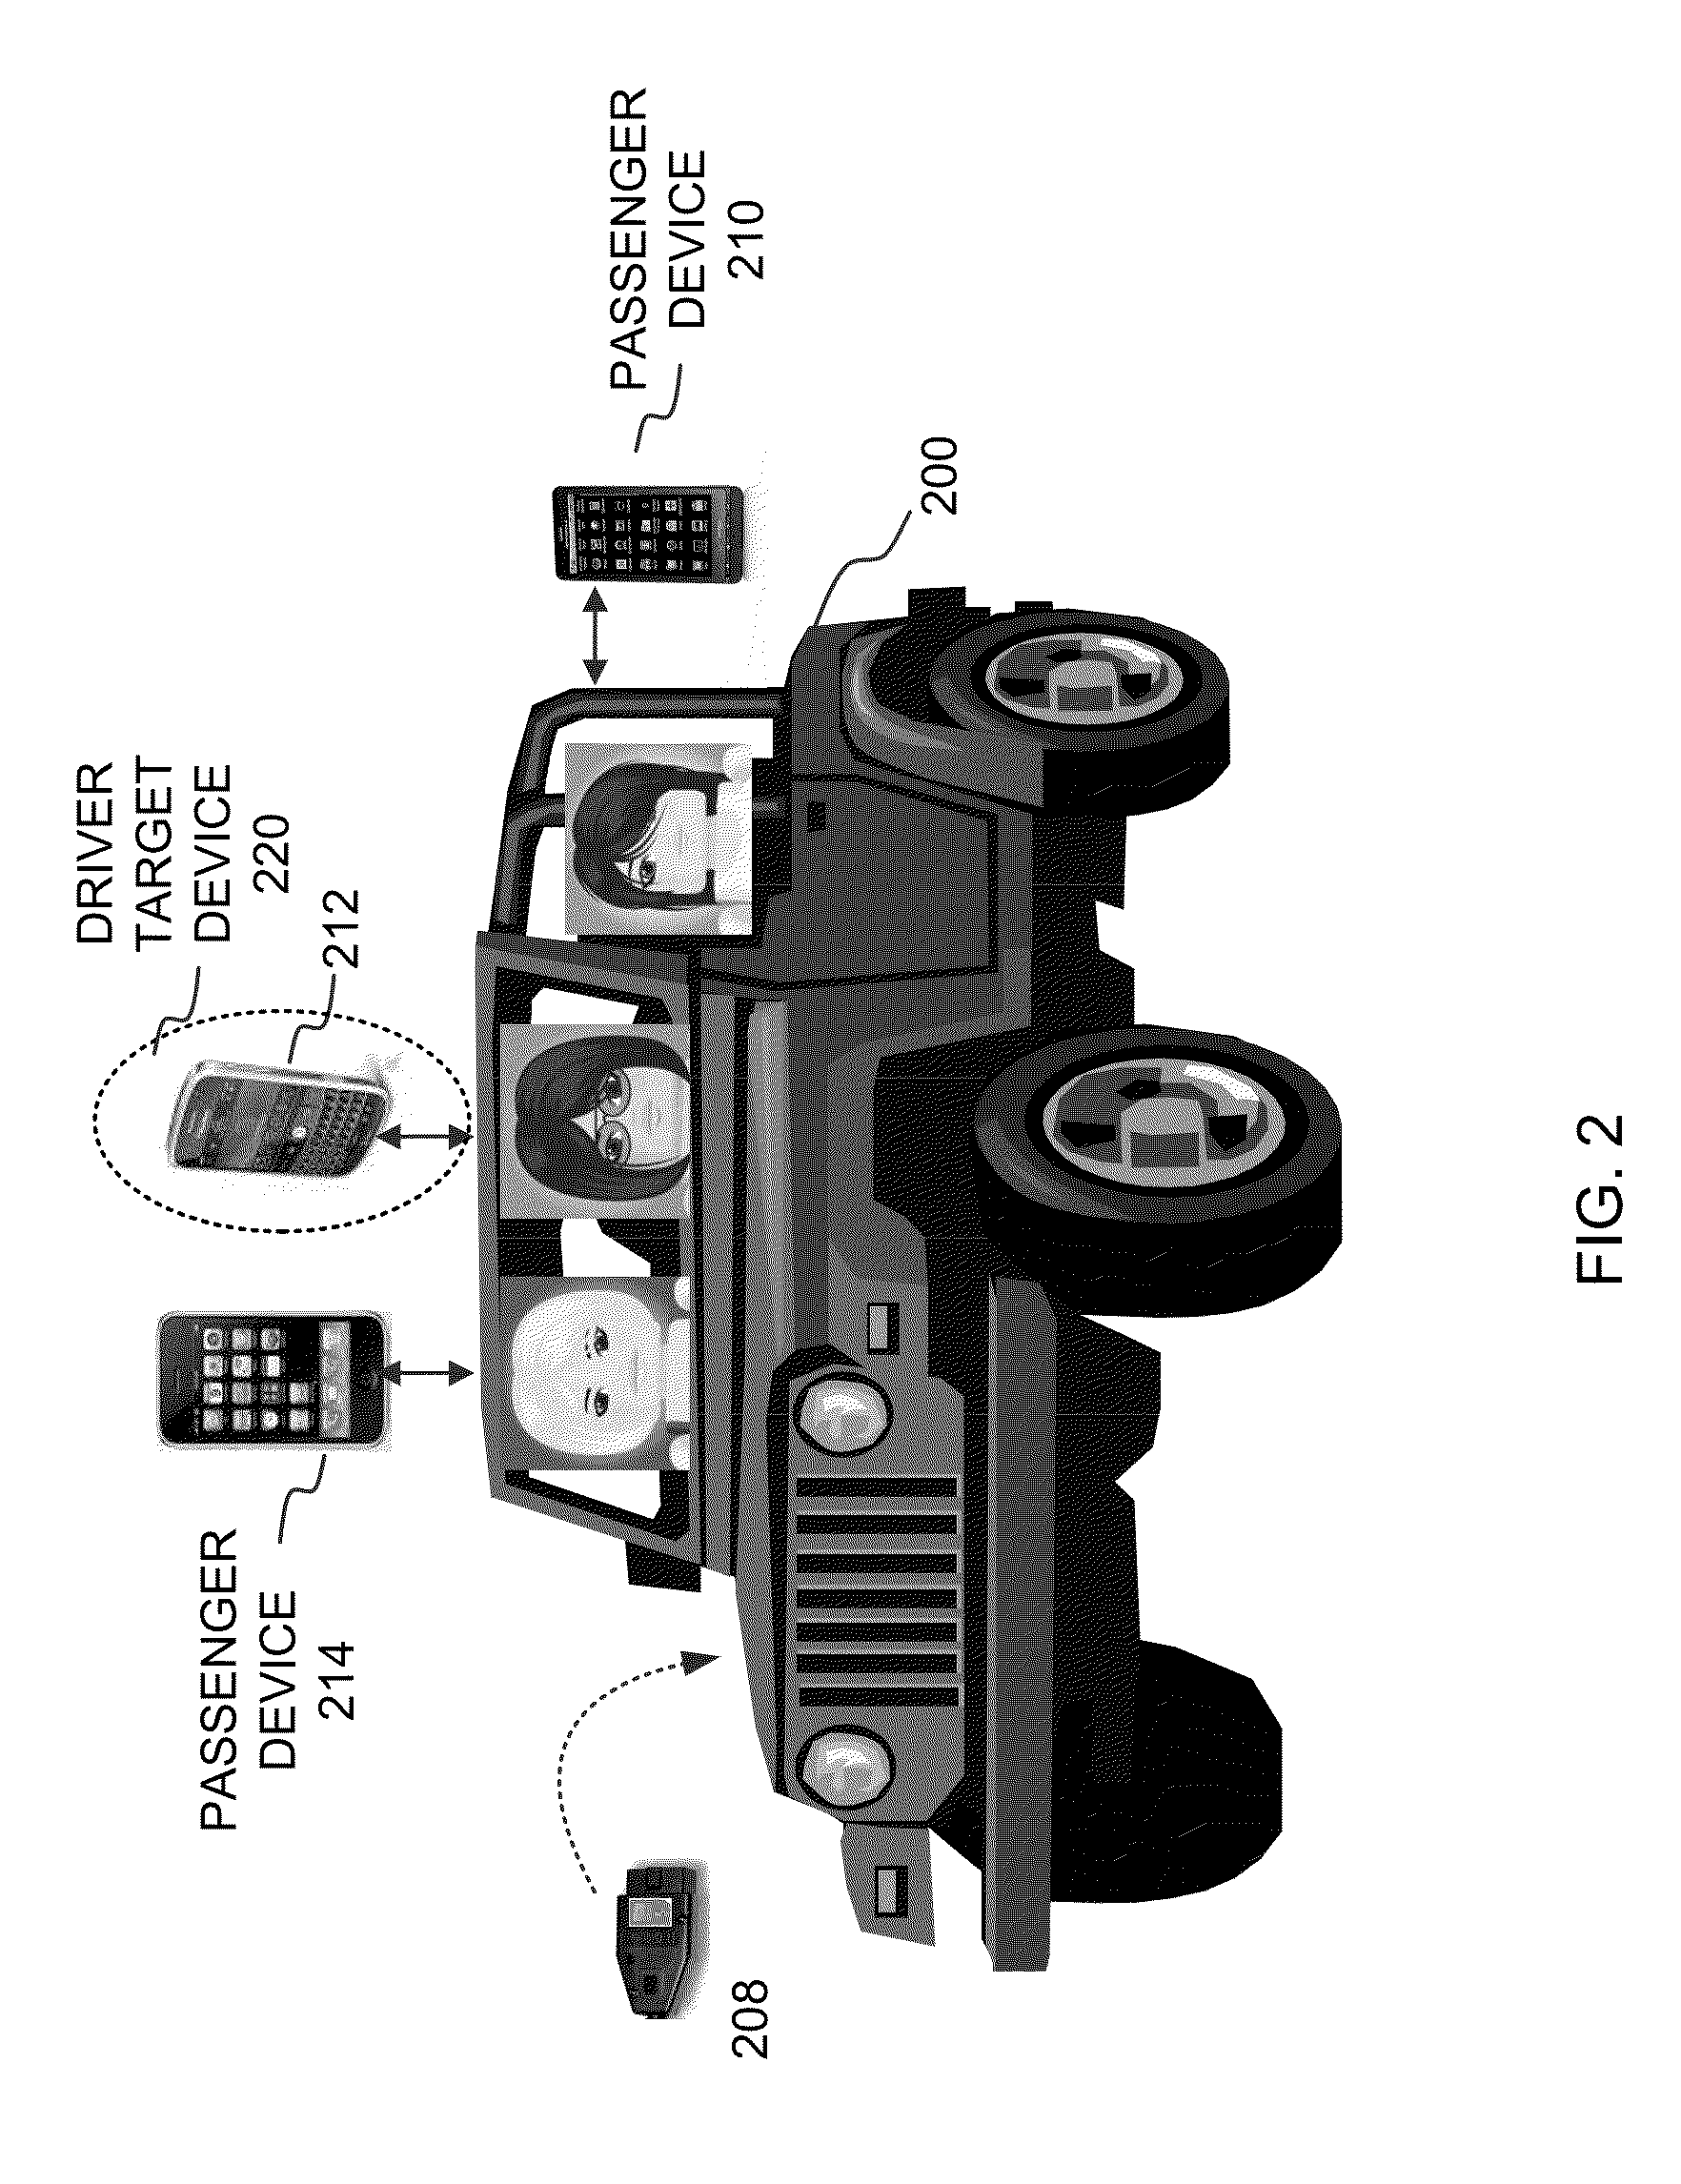 Automatic identification of a vehicle driver based on driving behavior